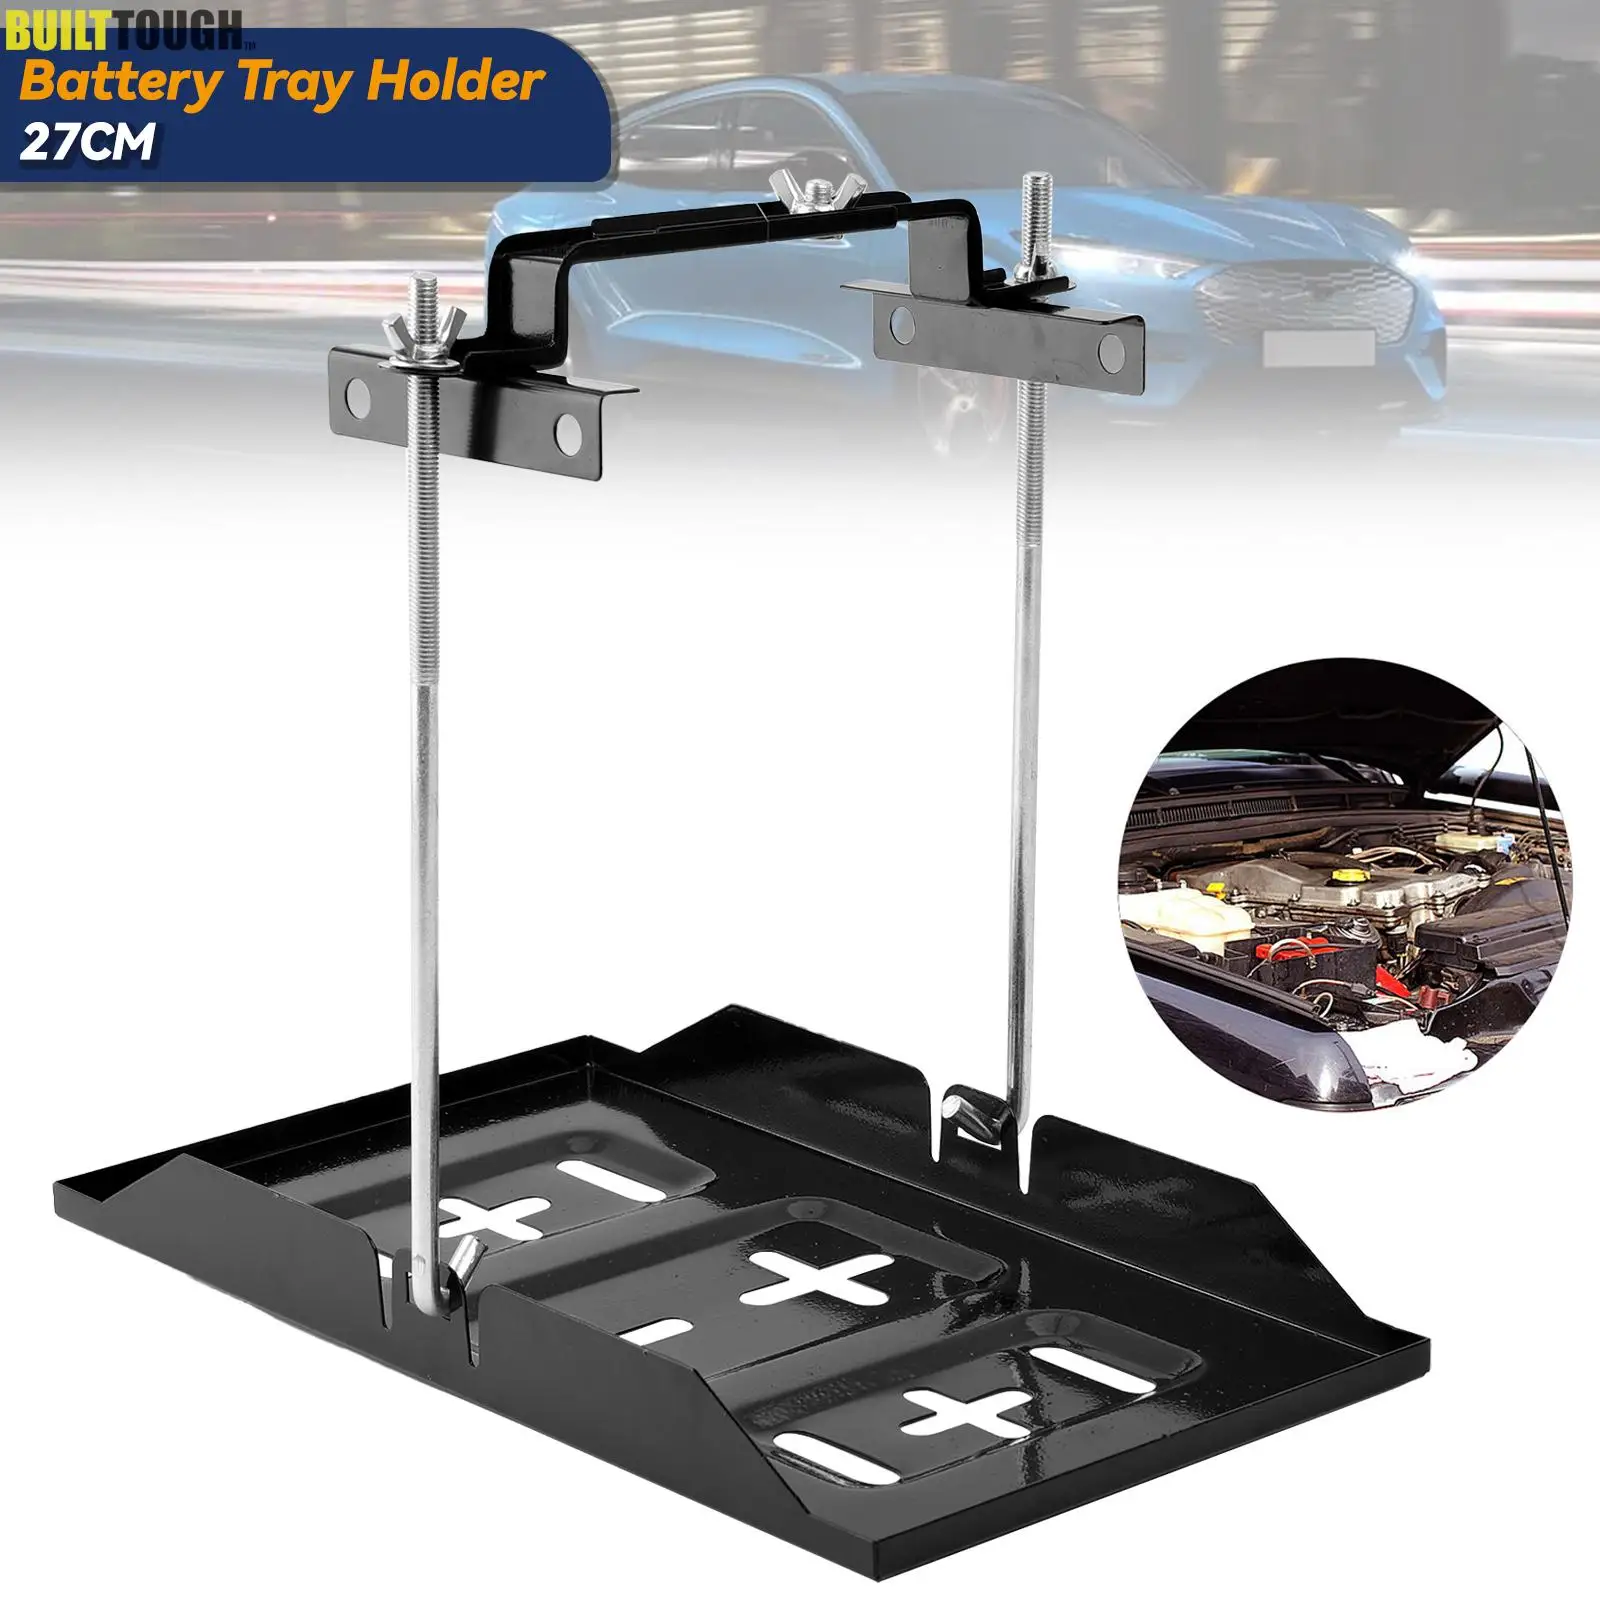 

27cm Universal Metal Car Battery Holder Mount Tray Automotive Marine Accessories Adjustable Hold Down Clamp Bracket Support Kit